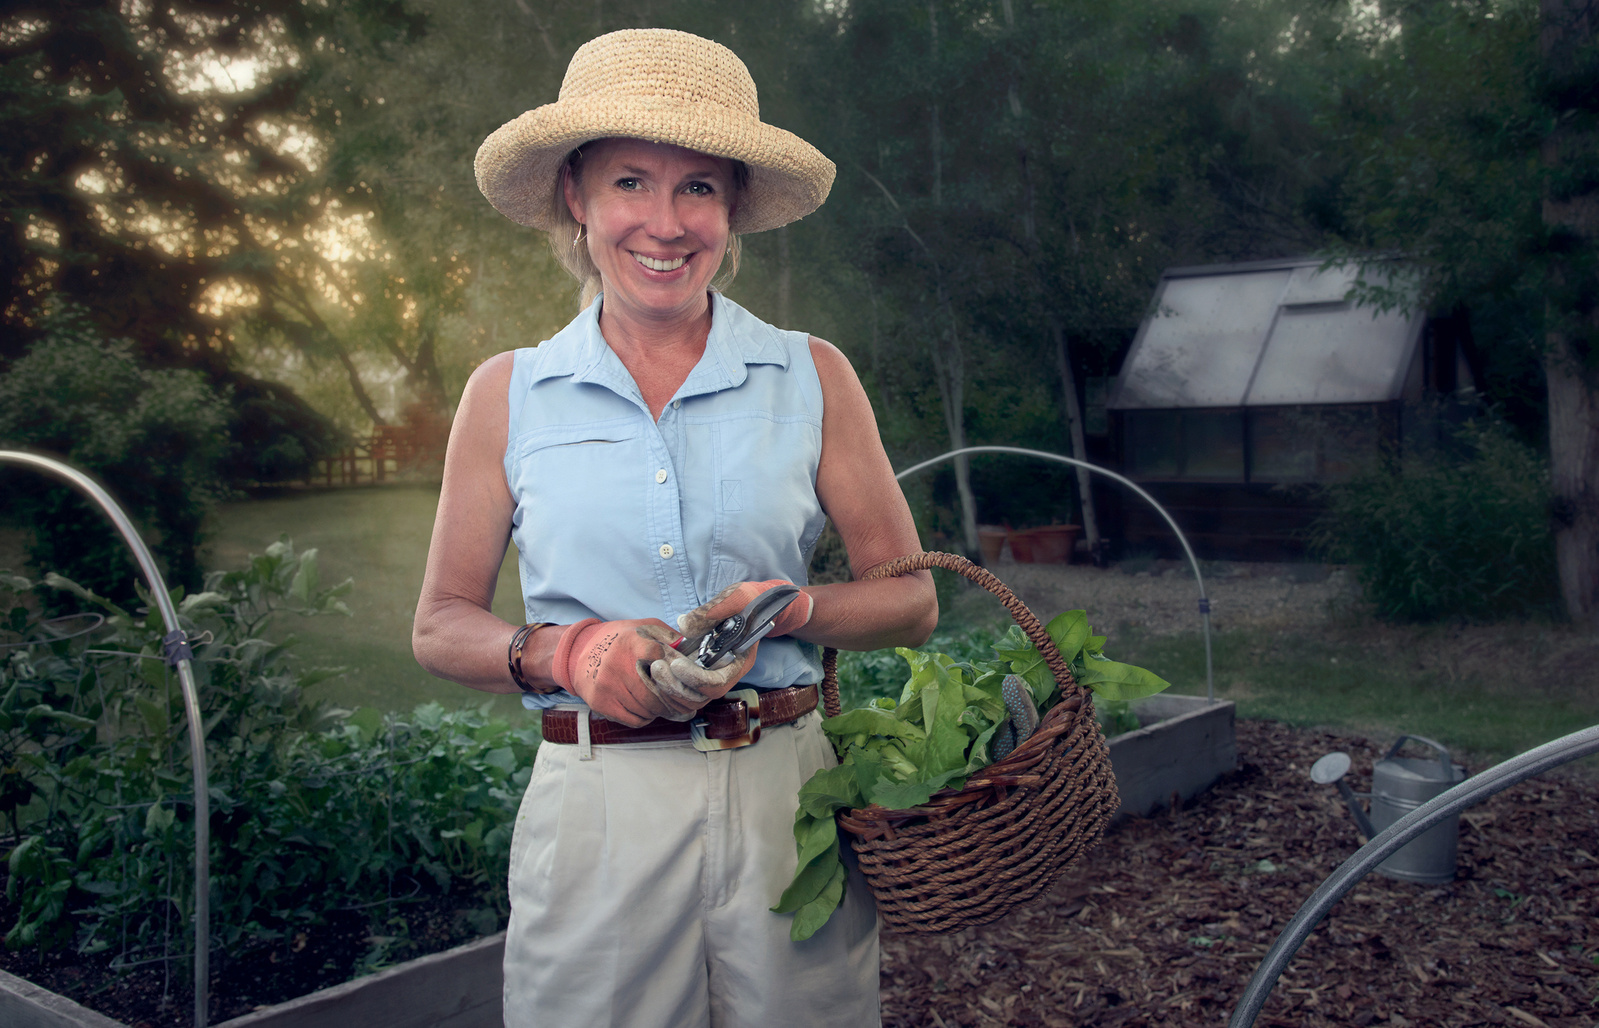 Woman in straw hat and blue shirt in her backyard garden, holding a basket of fresh-cut lettuce.